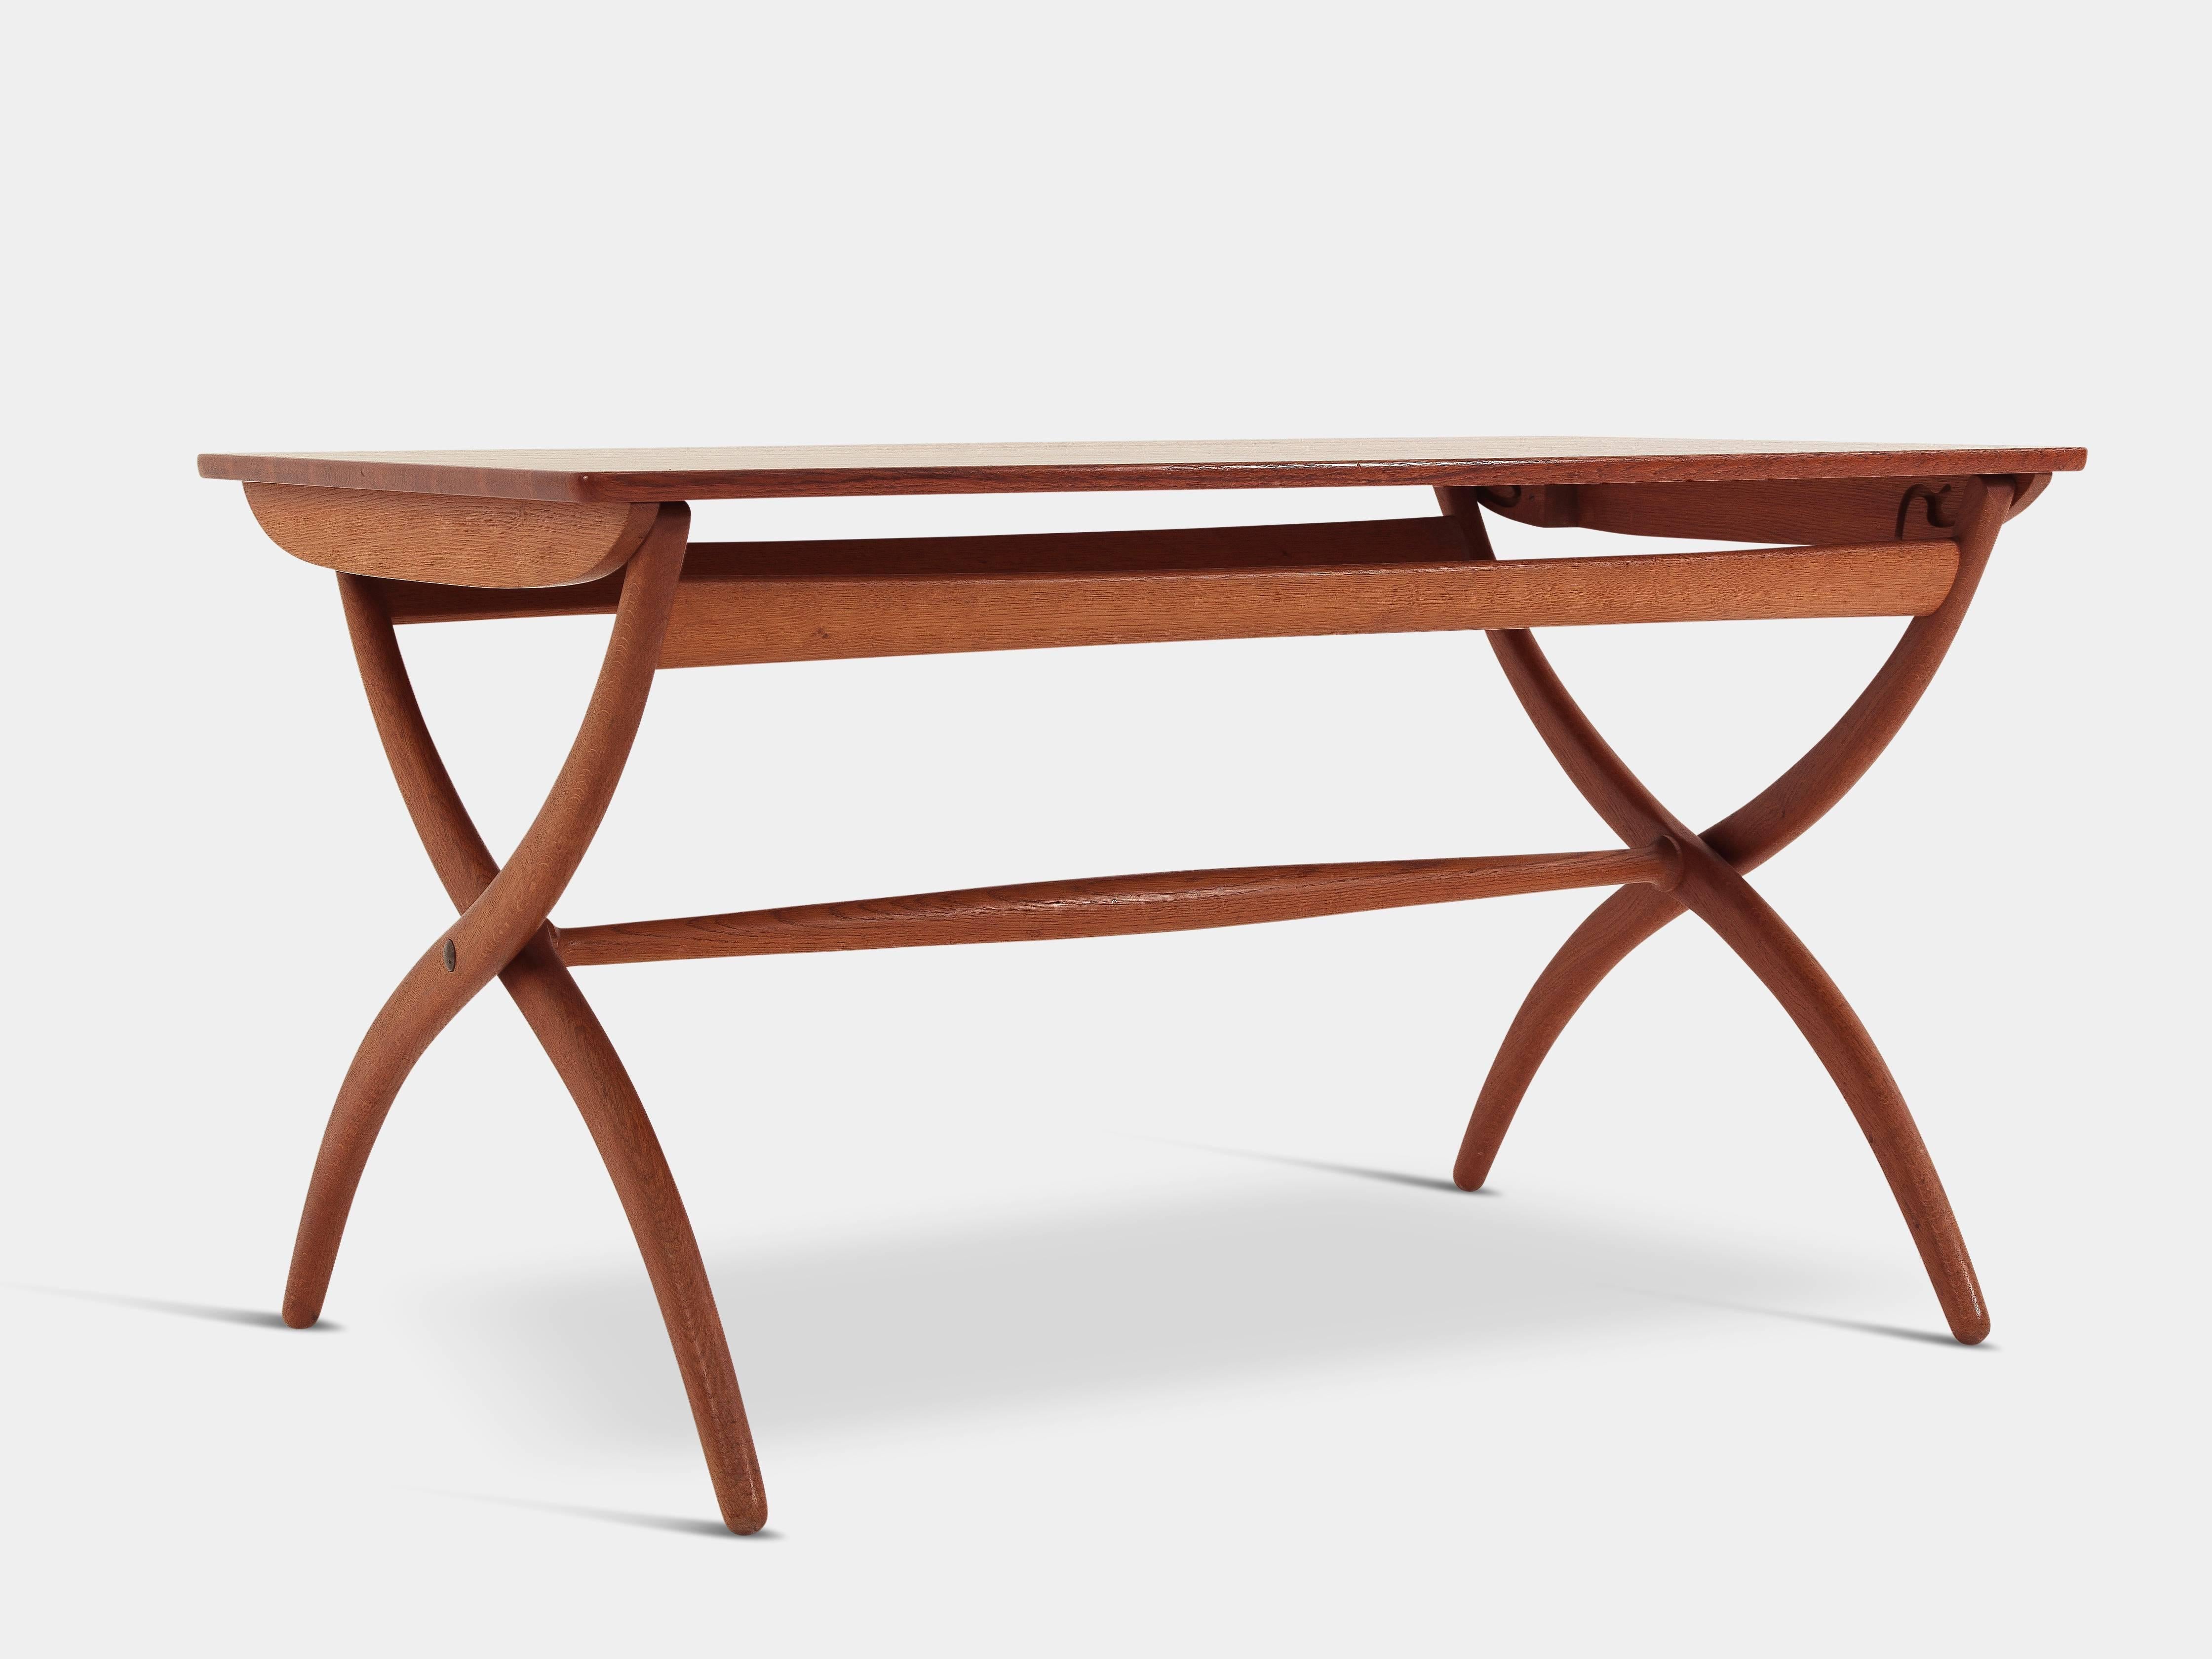 Ole Wanscher (1903-1985)

Danish designer coffee table from 1951 with adjustable height (60-70 cm) in teak and by the master cabinetmaker Rud Rasmussen. This is a classic and original midcentury Danish modern design piece by one of the leading